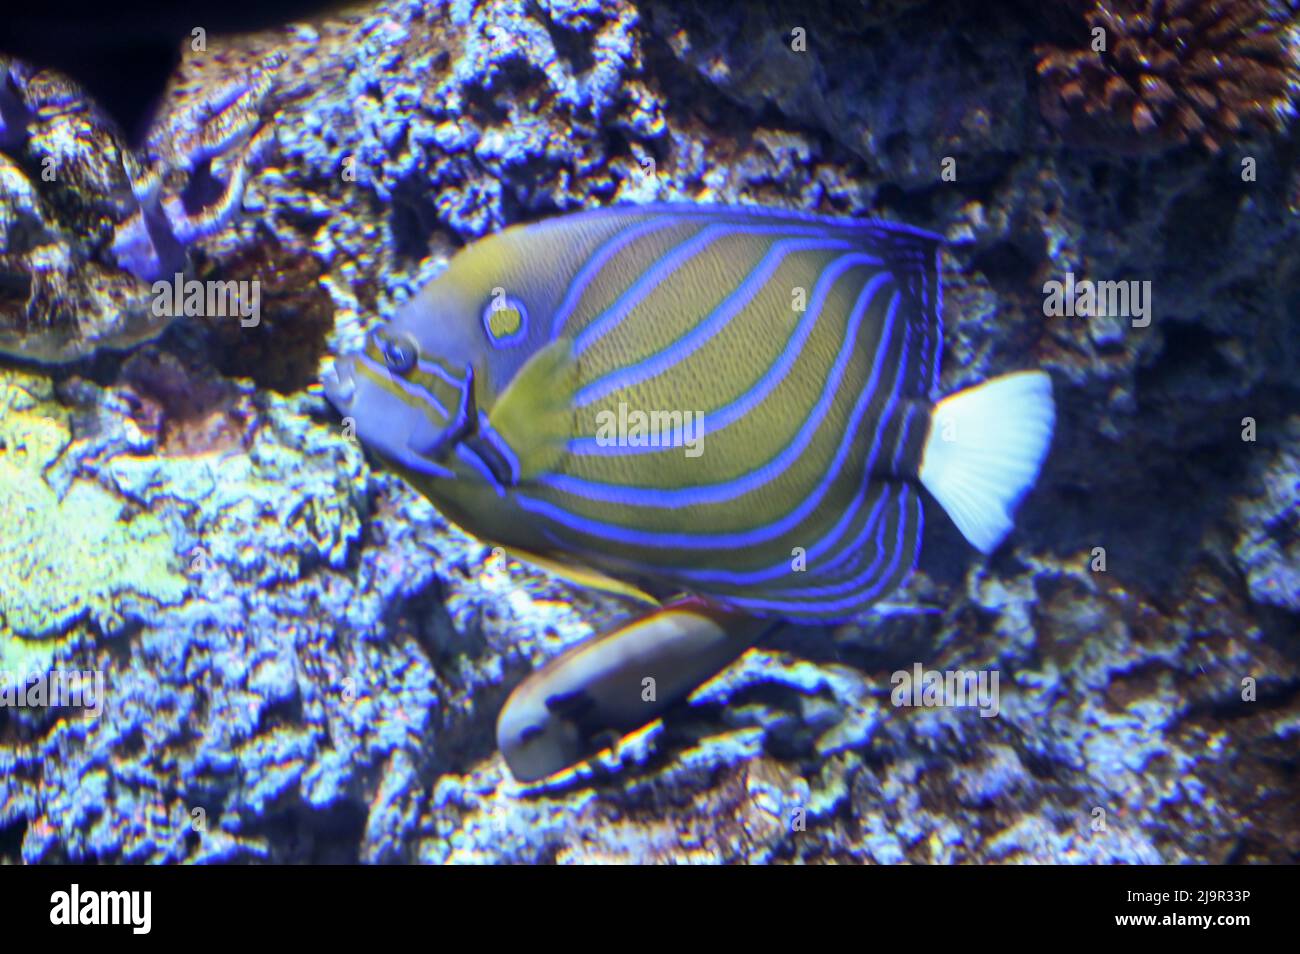 Chaetodontoplus septentrionalis, the blue-striped angelfish and bluelined angelfish, is a species of marine ray-finned fish, swimming in fish tank aqu Stock Photo